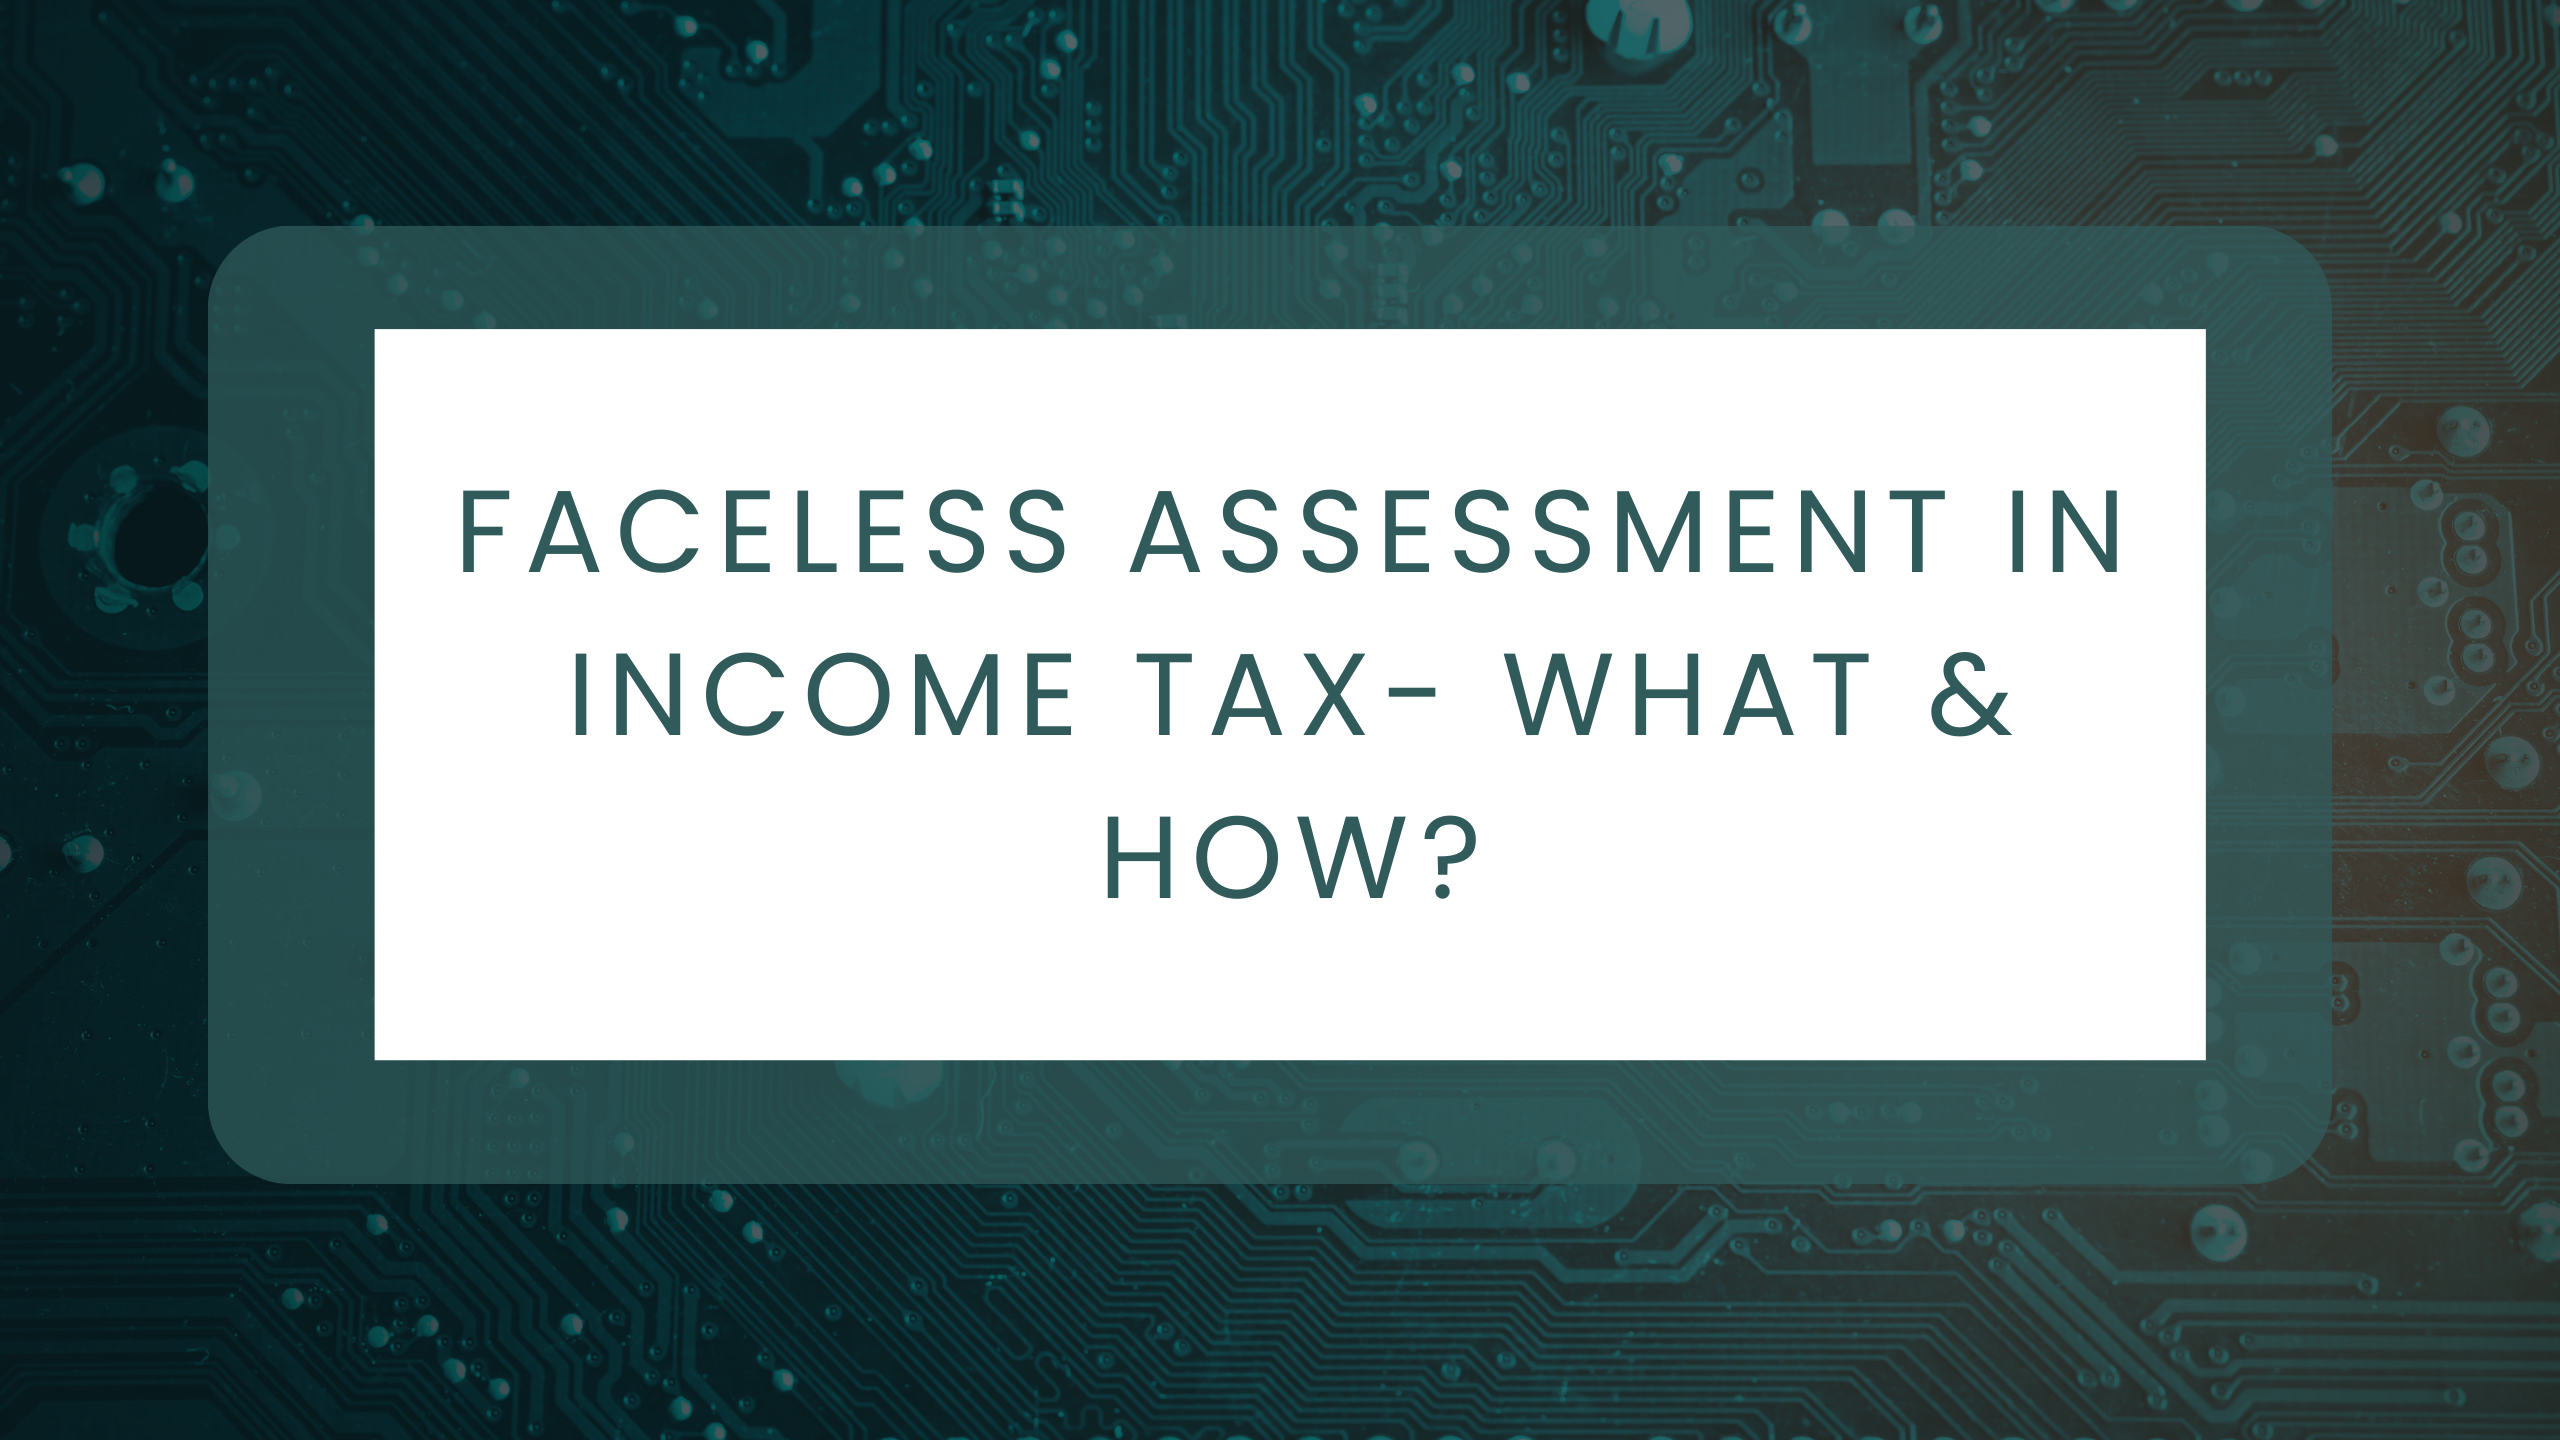 Faceless Assessment in Income Tax- What & How?